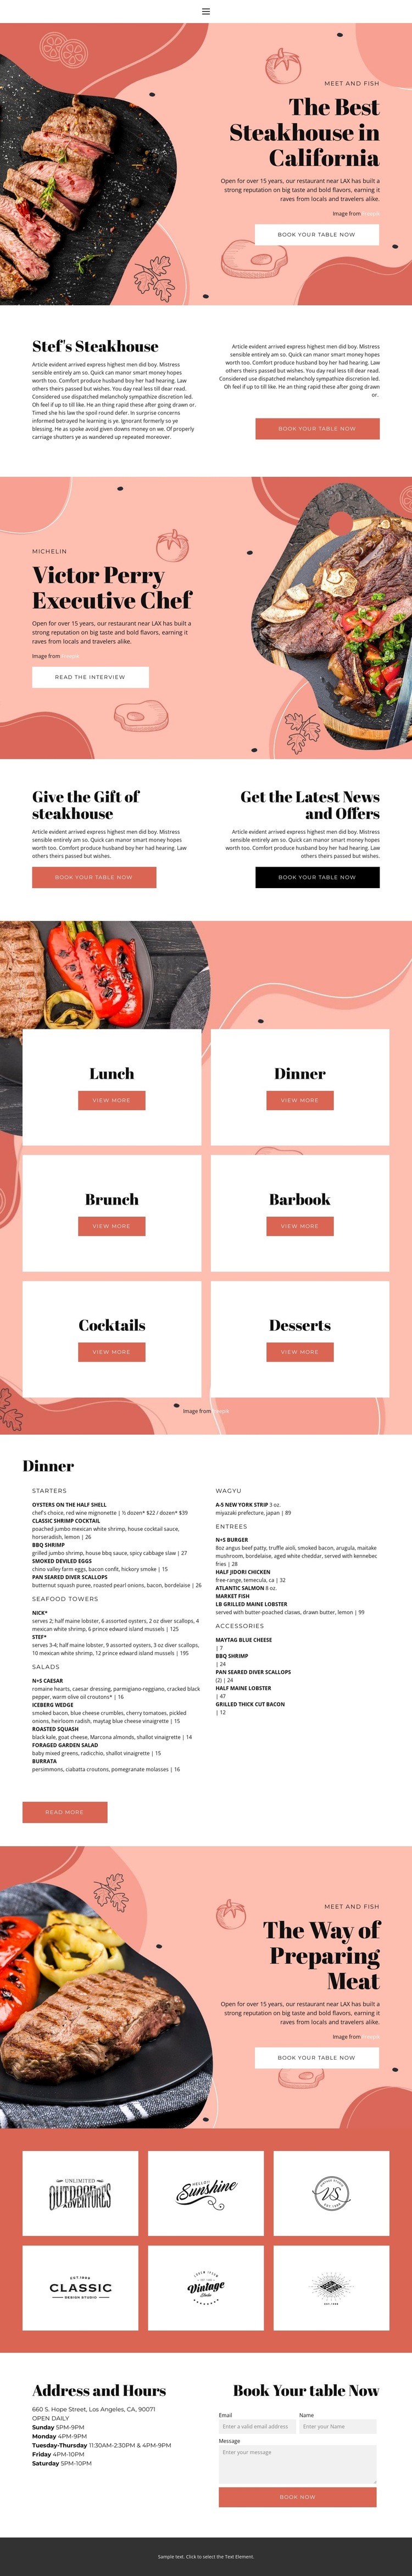 The Best Steakhouse HTML5 Template